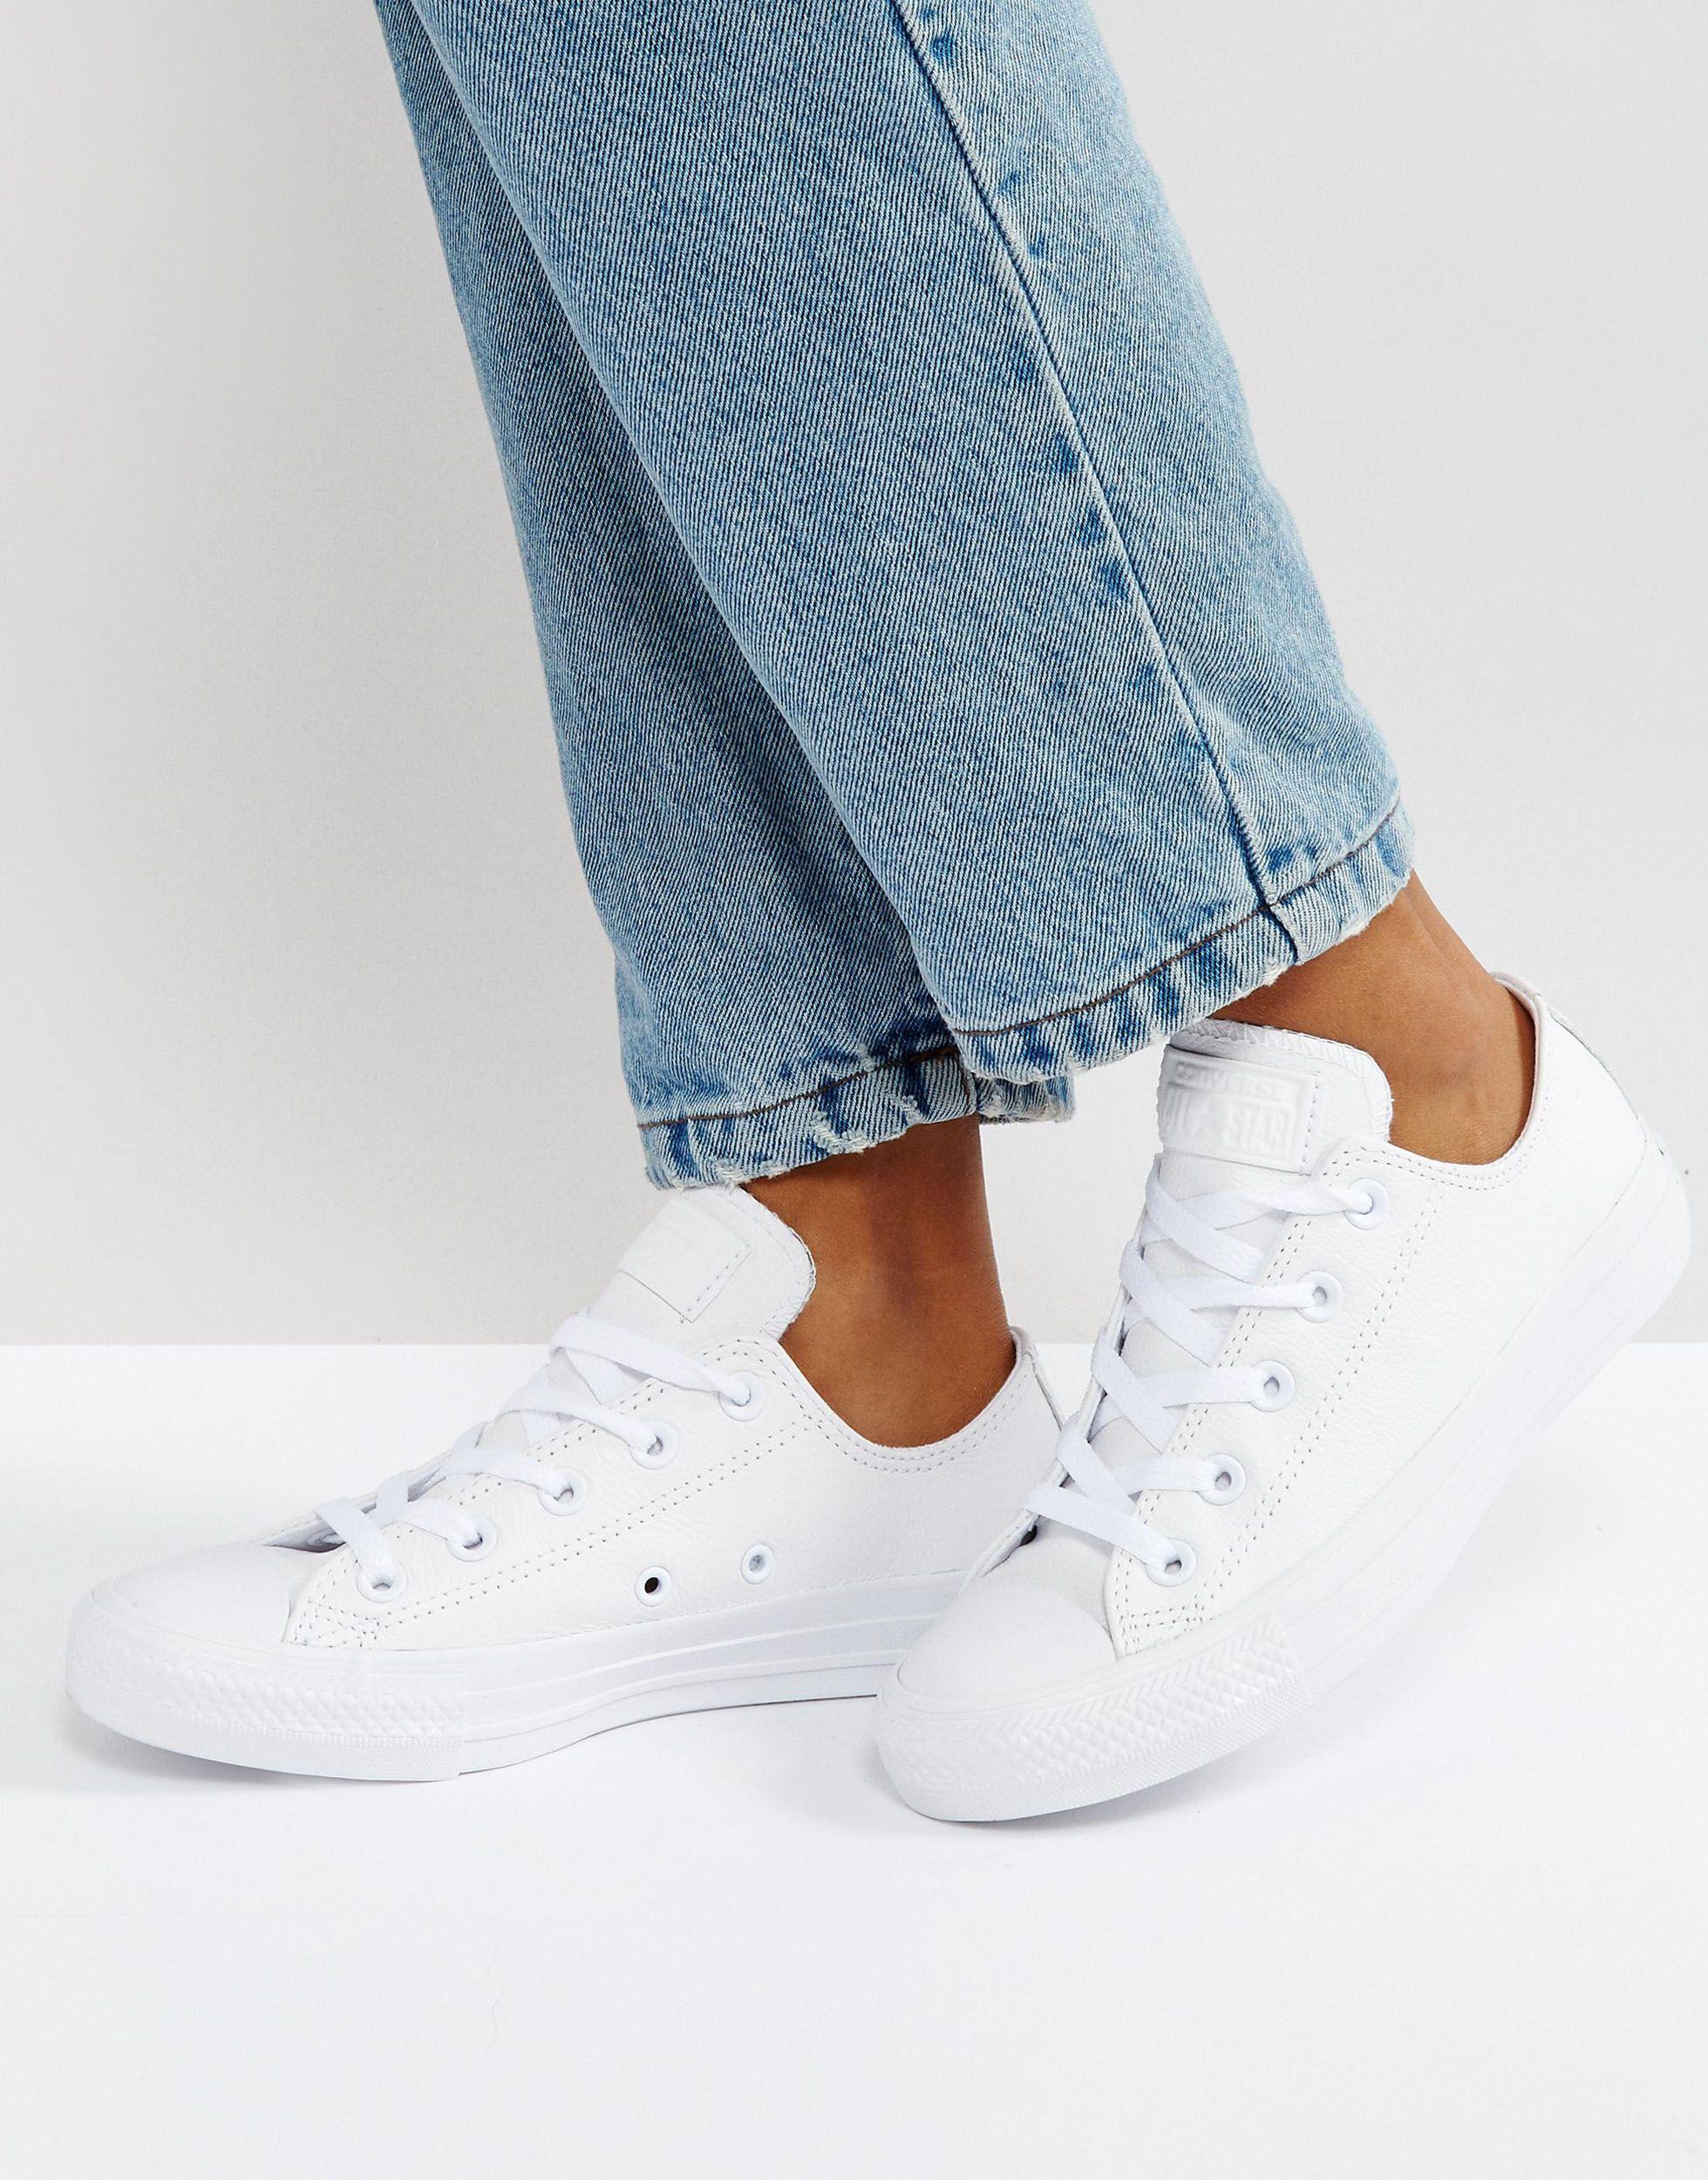 Palads Etableret teori kærlighed Converse Chuck Taylor Ox Leather White Monochrome Sneakers - Lyst